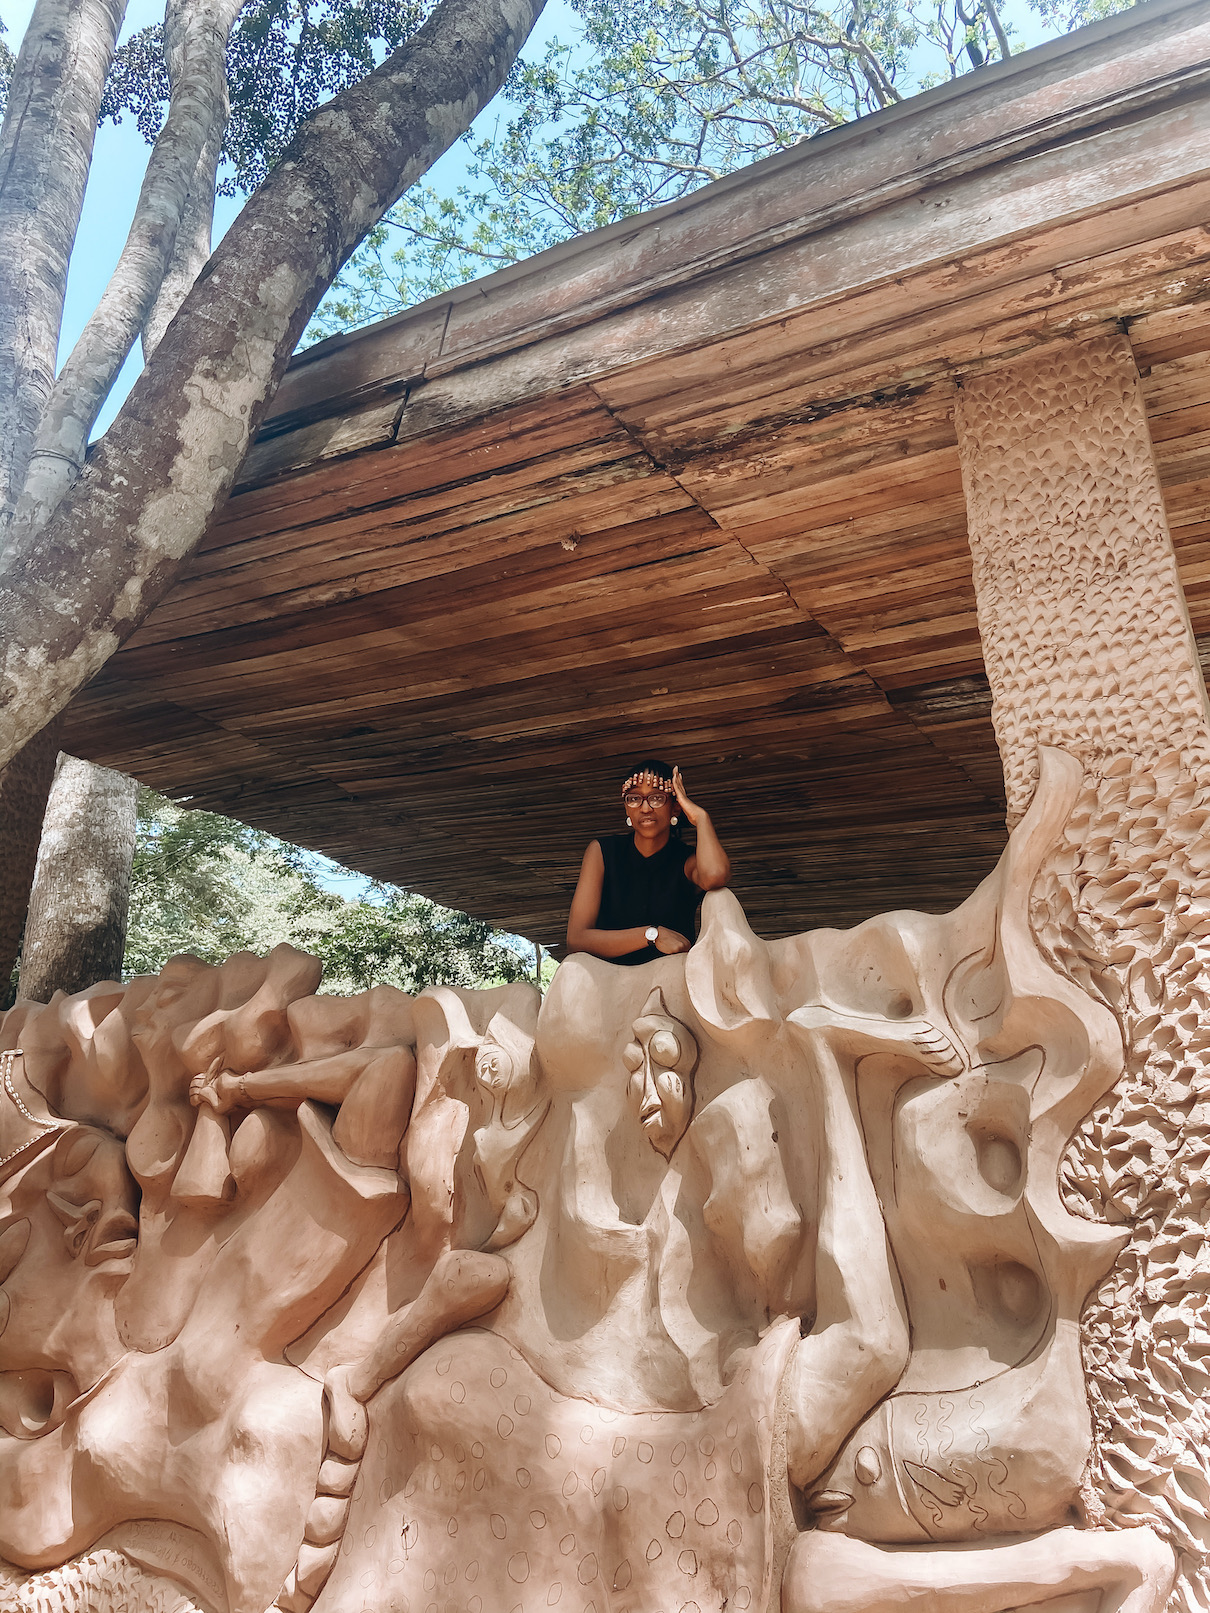 Nigerian travel blogger cassie daves standing at the entrance to the osun osogbo grove